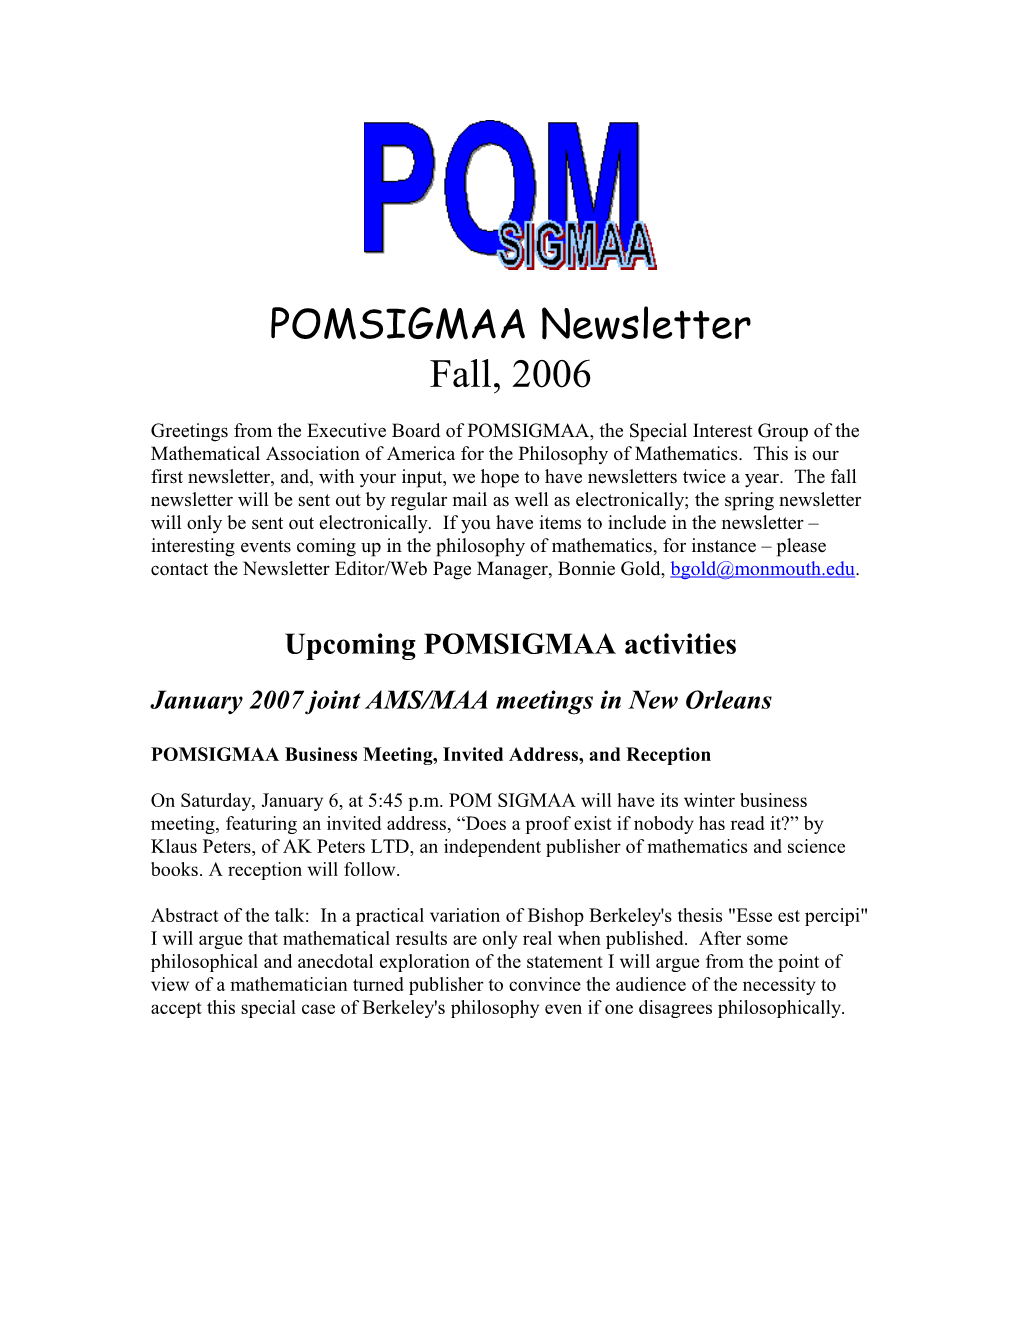 POMSIGMAA Business Meeting, Invited Address, and Reception